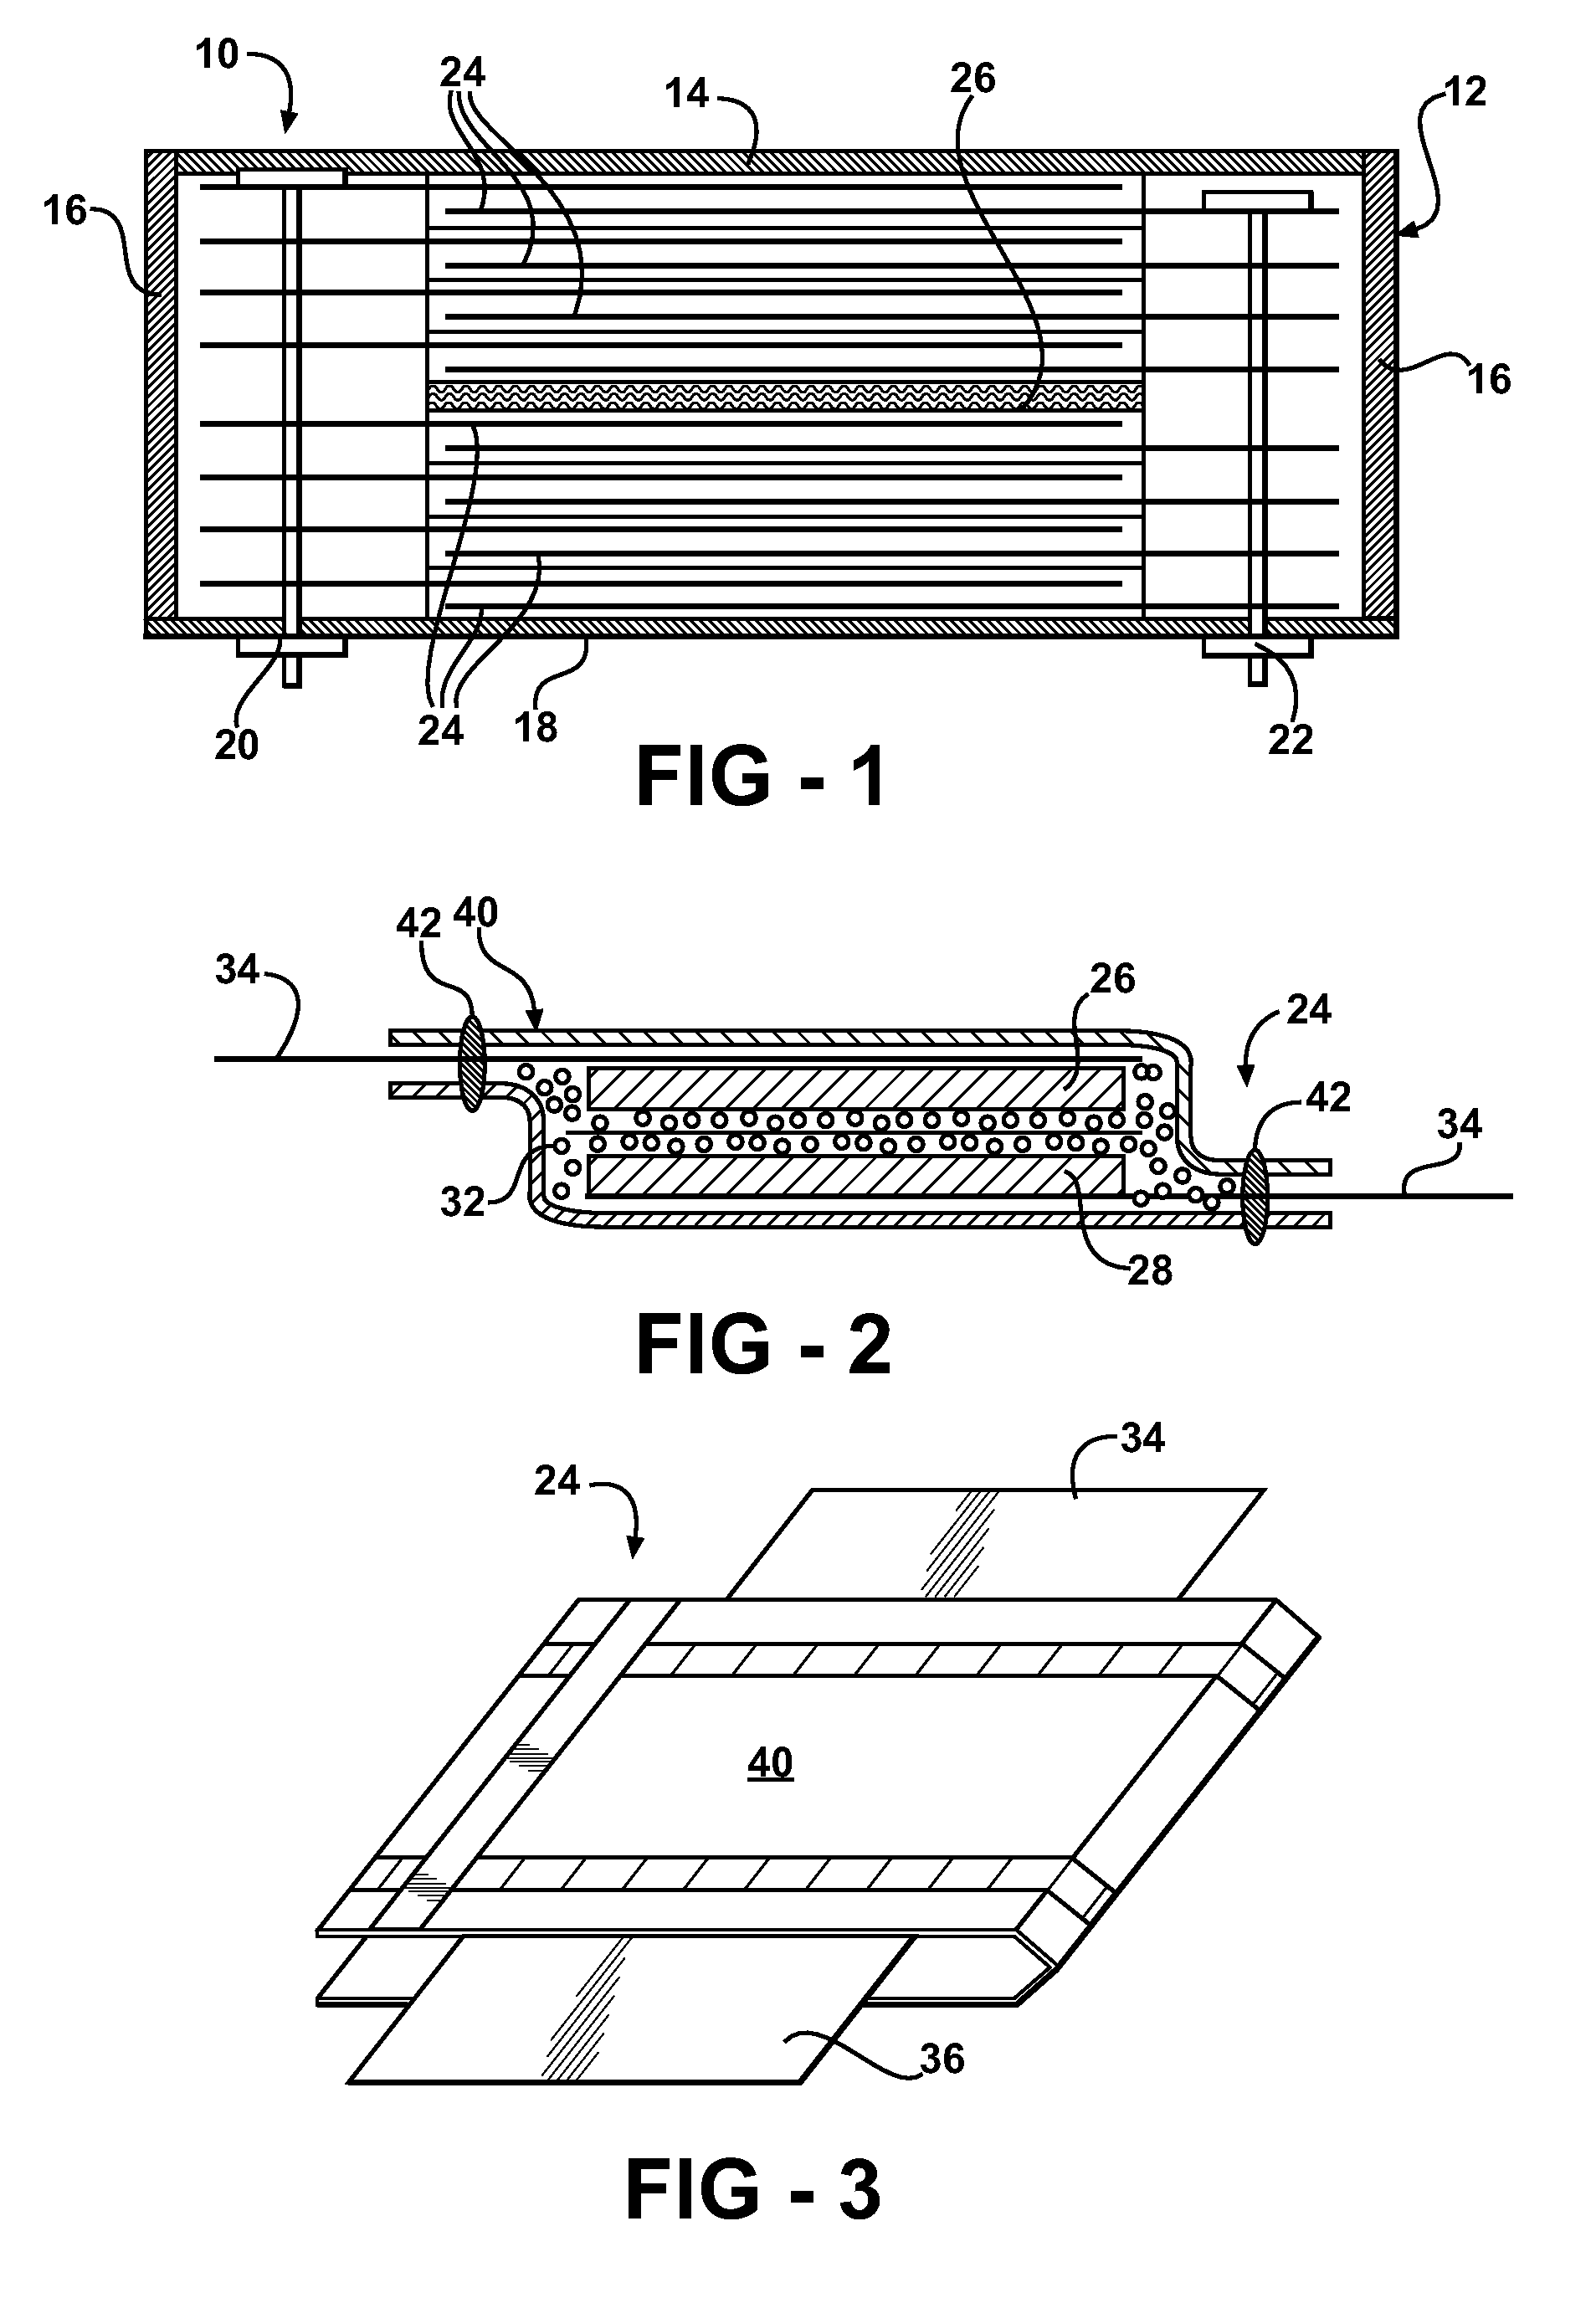 Method of recycling a battery